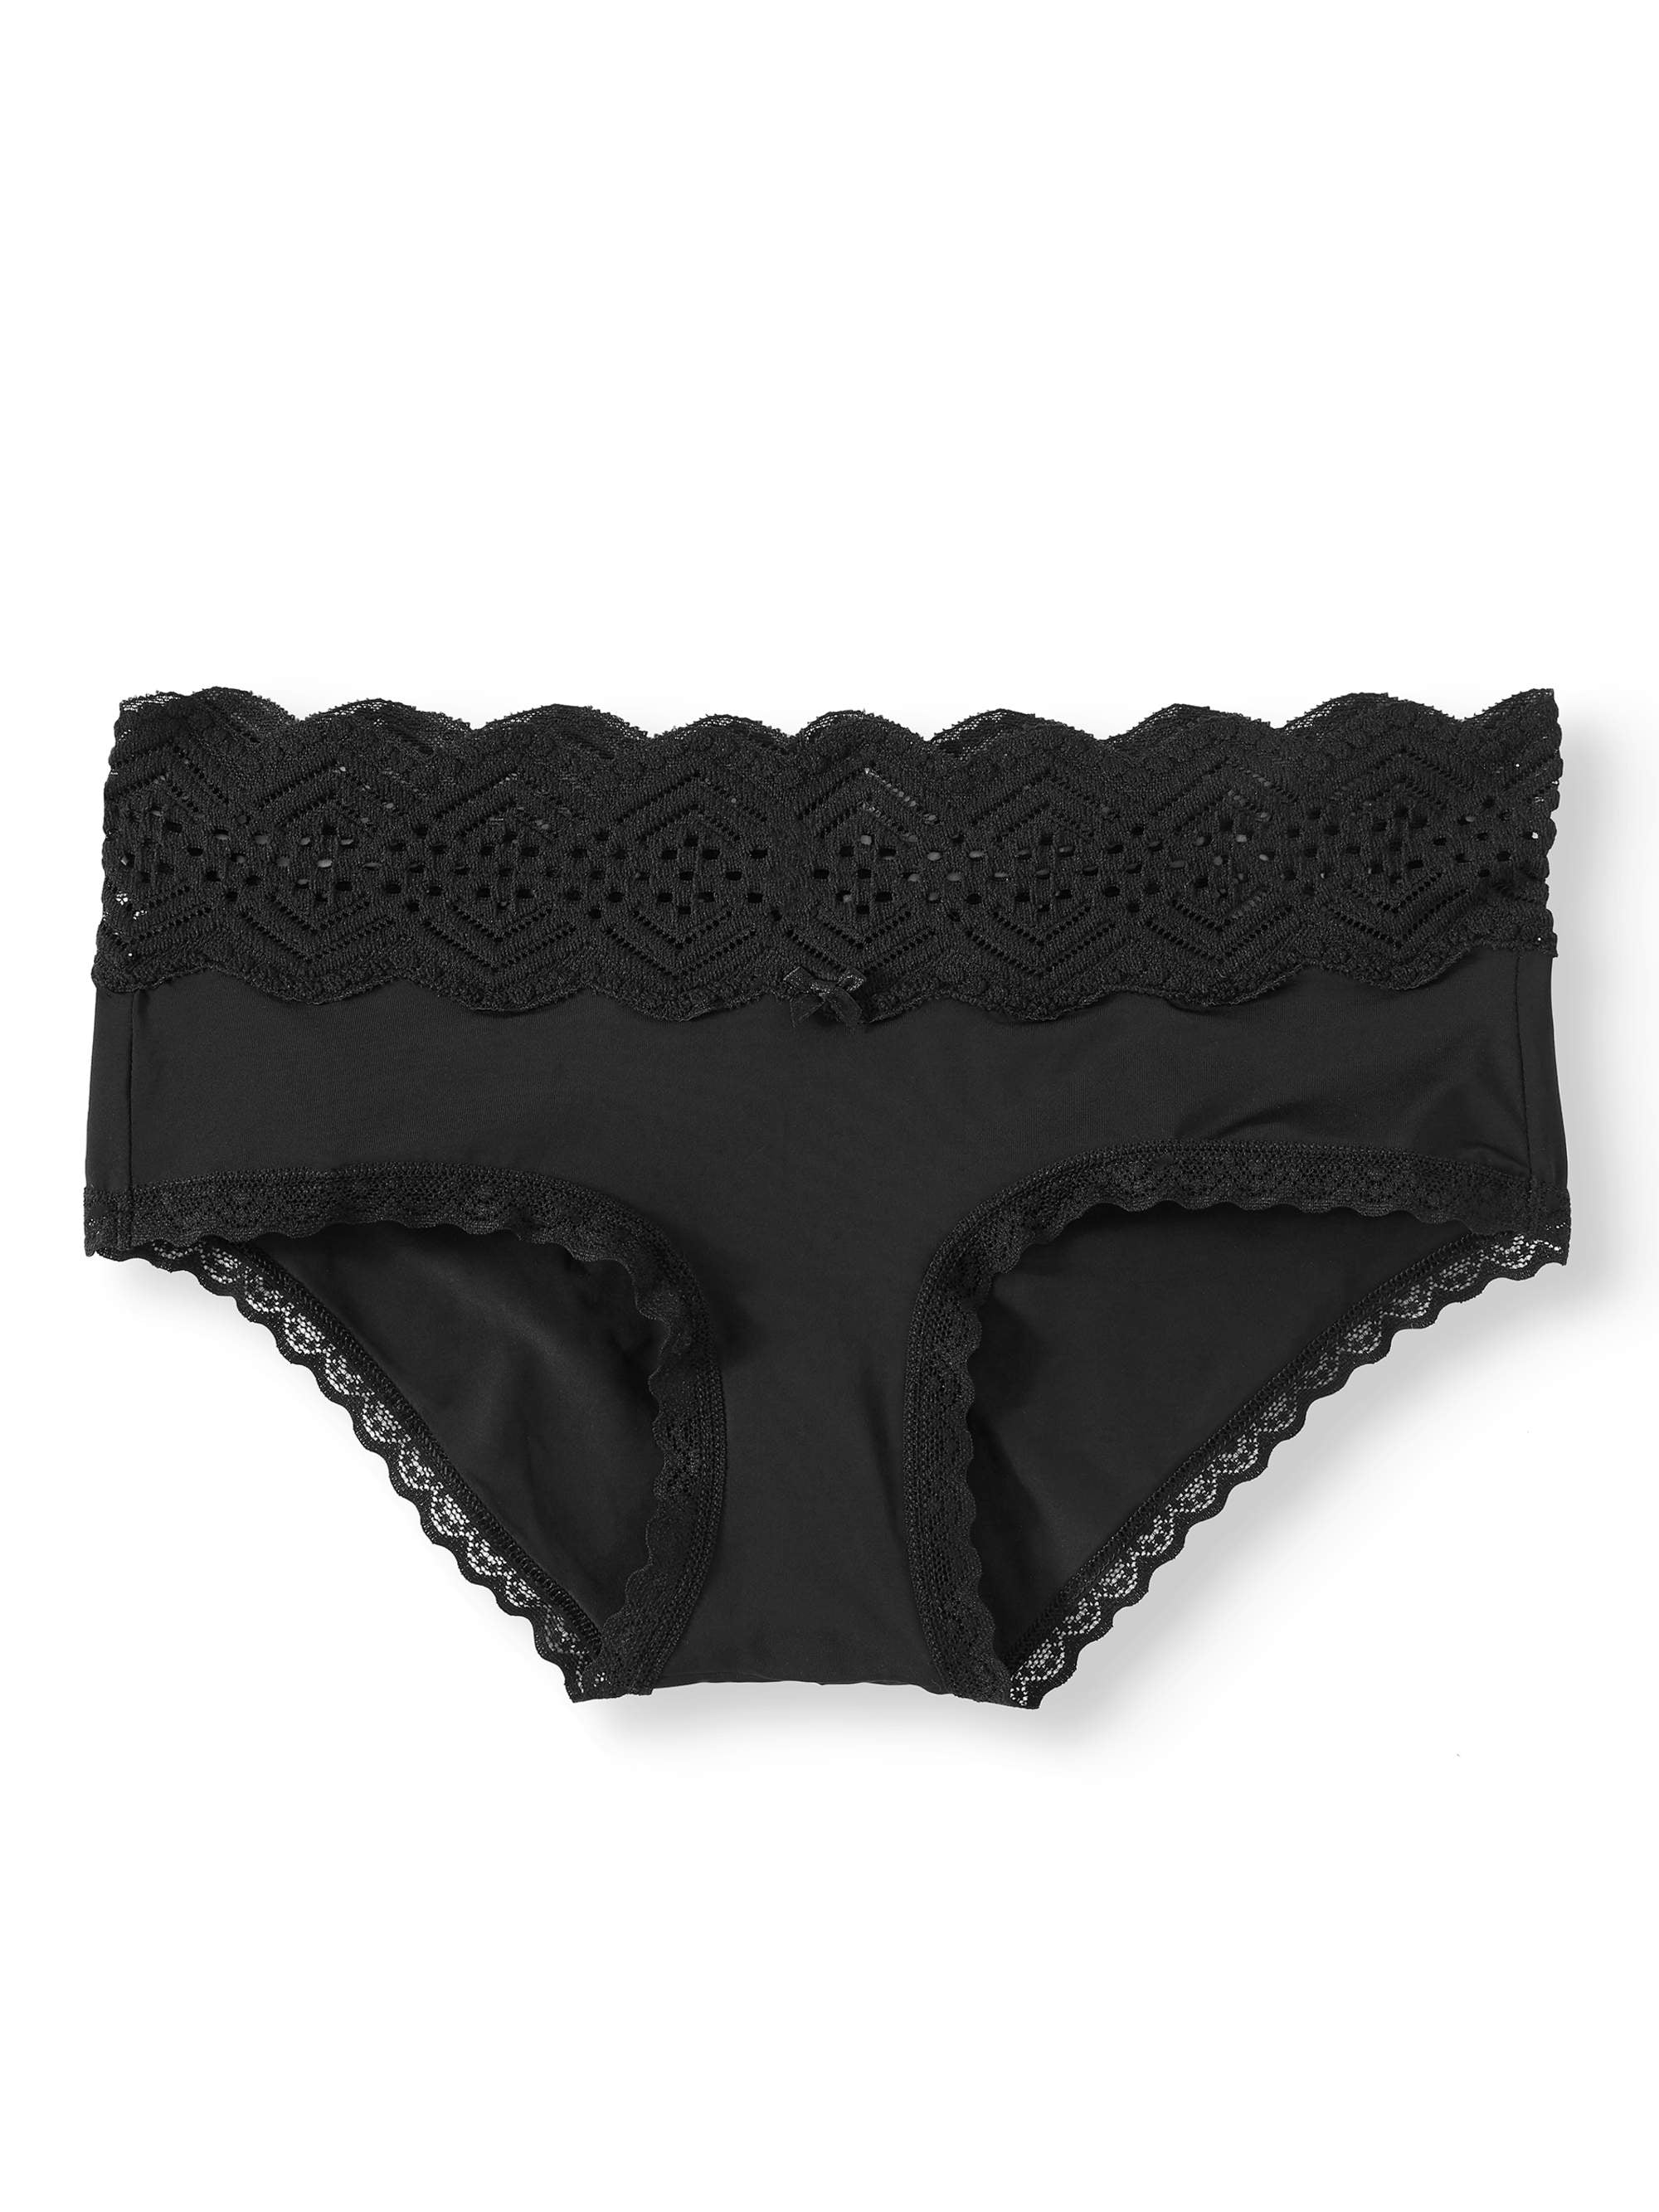 Details about   Women's Mamia Lace Hipster Underwear Black Size M